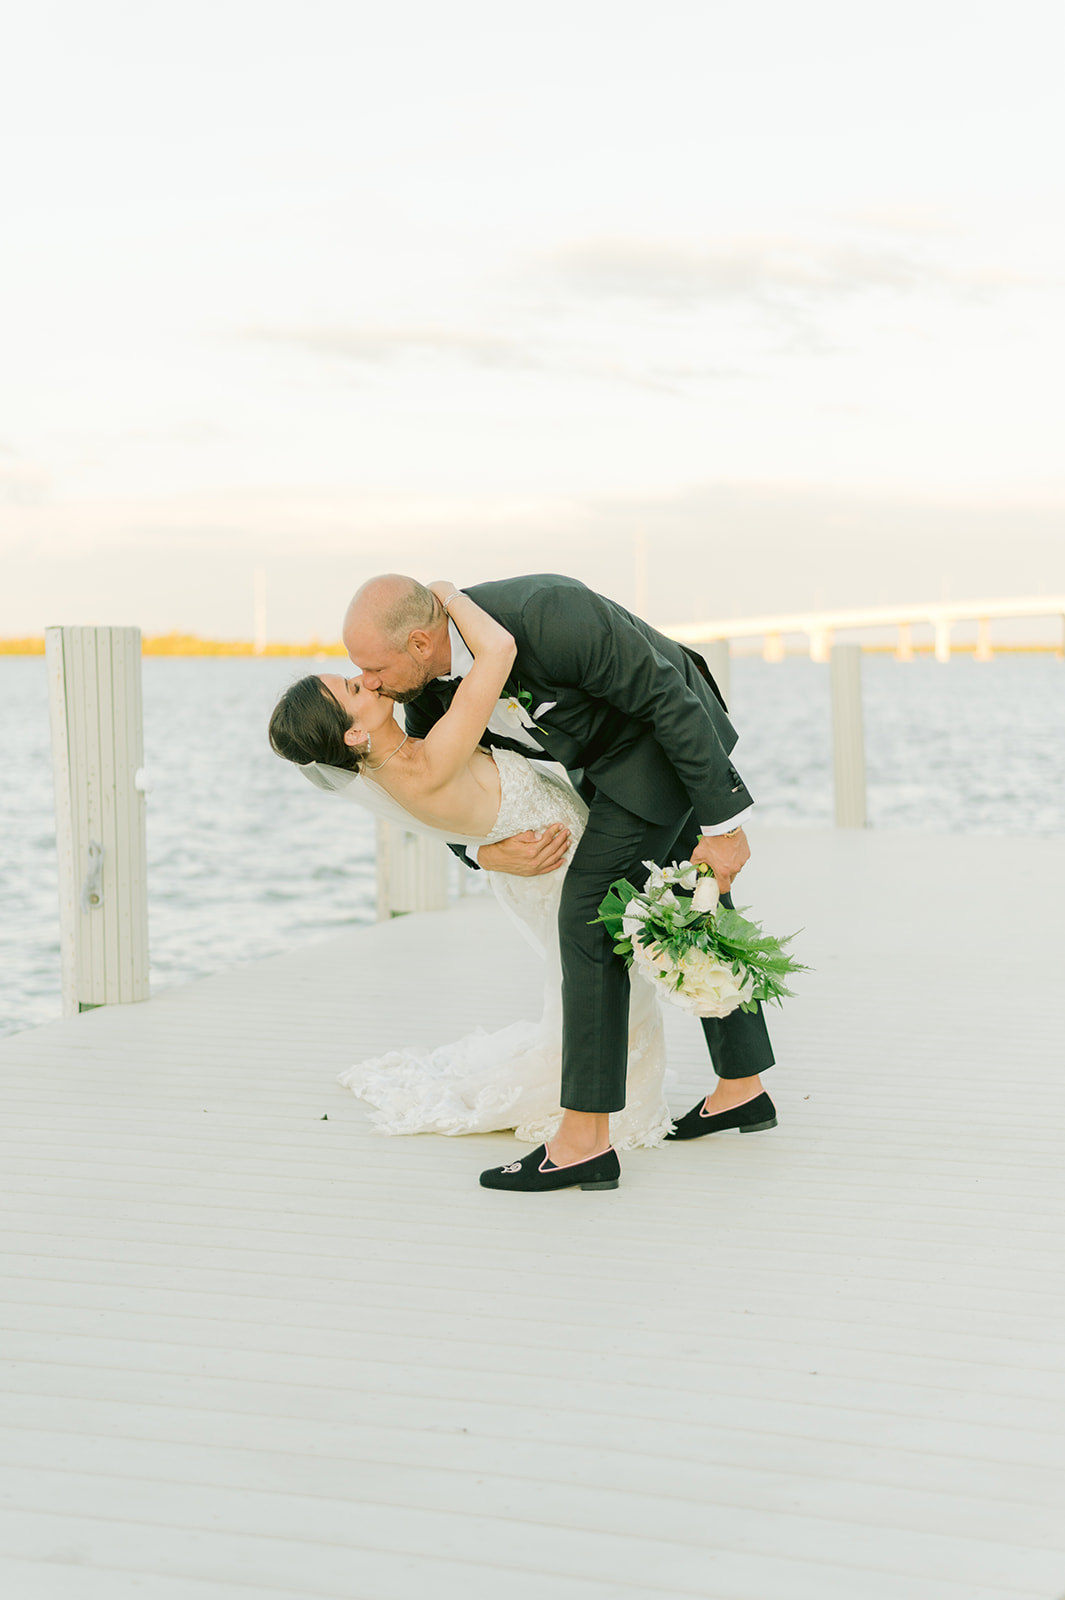 Naples Florida Fine Art Wedding Photographer - A Unique and Personalized Touch
